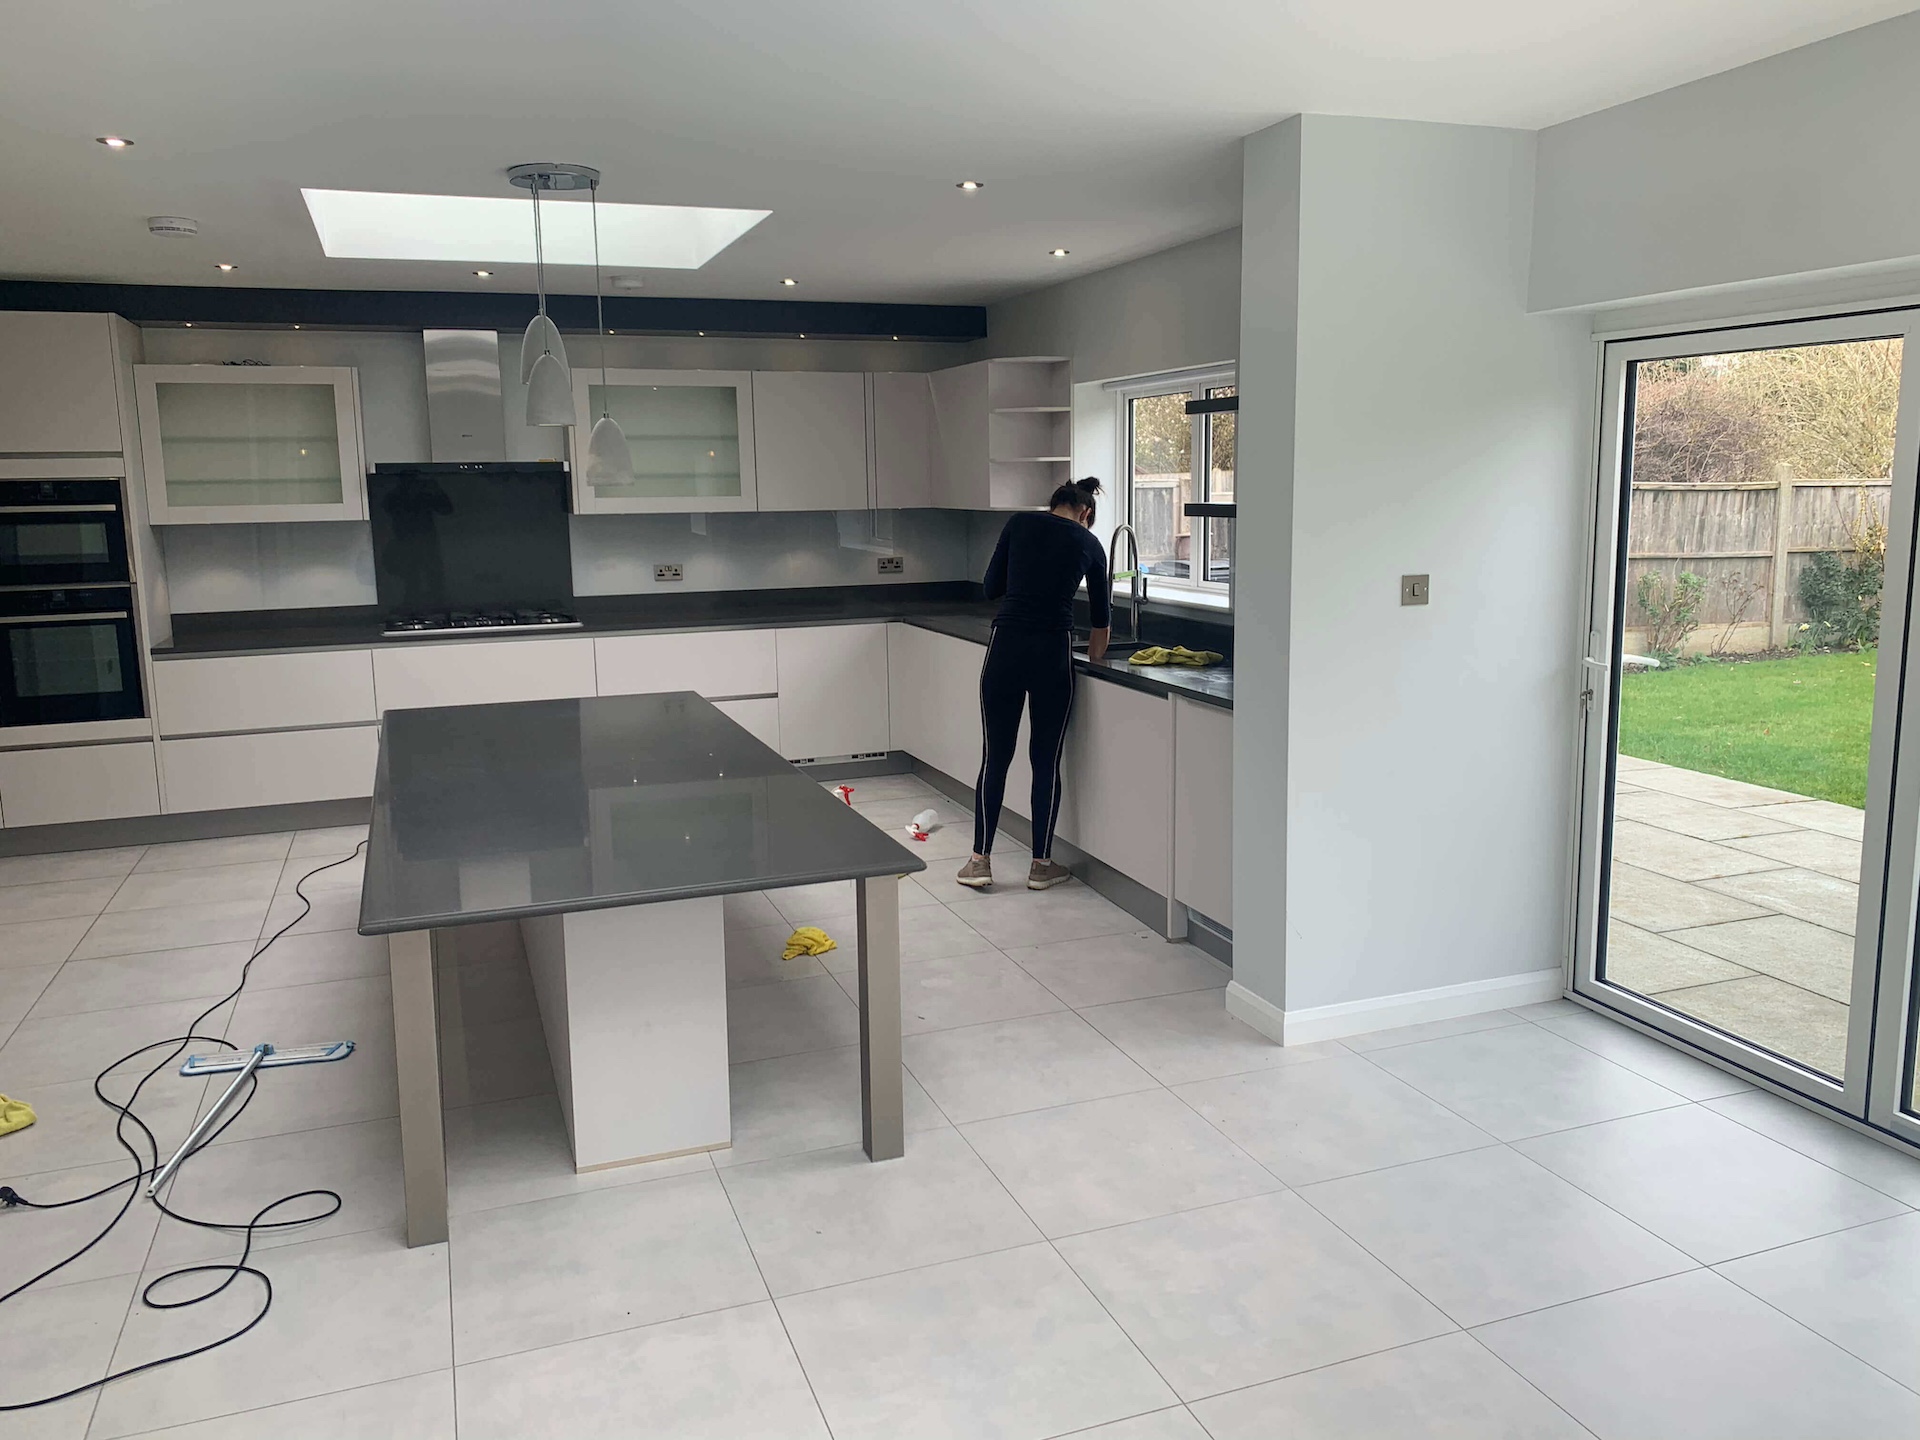 Professional female cleaner from Cleaningsure actively engaged in end of lease cleaning service in Ealing W5, wearing uniform and gloves, meticulously cleaning a living space to ensure top-notch cleanliness.